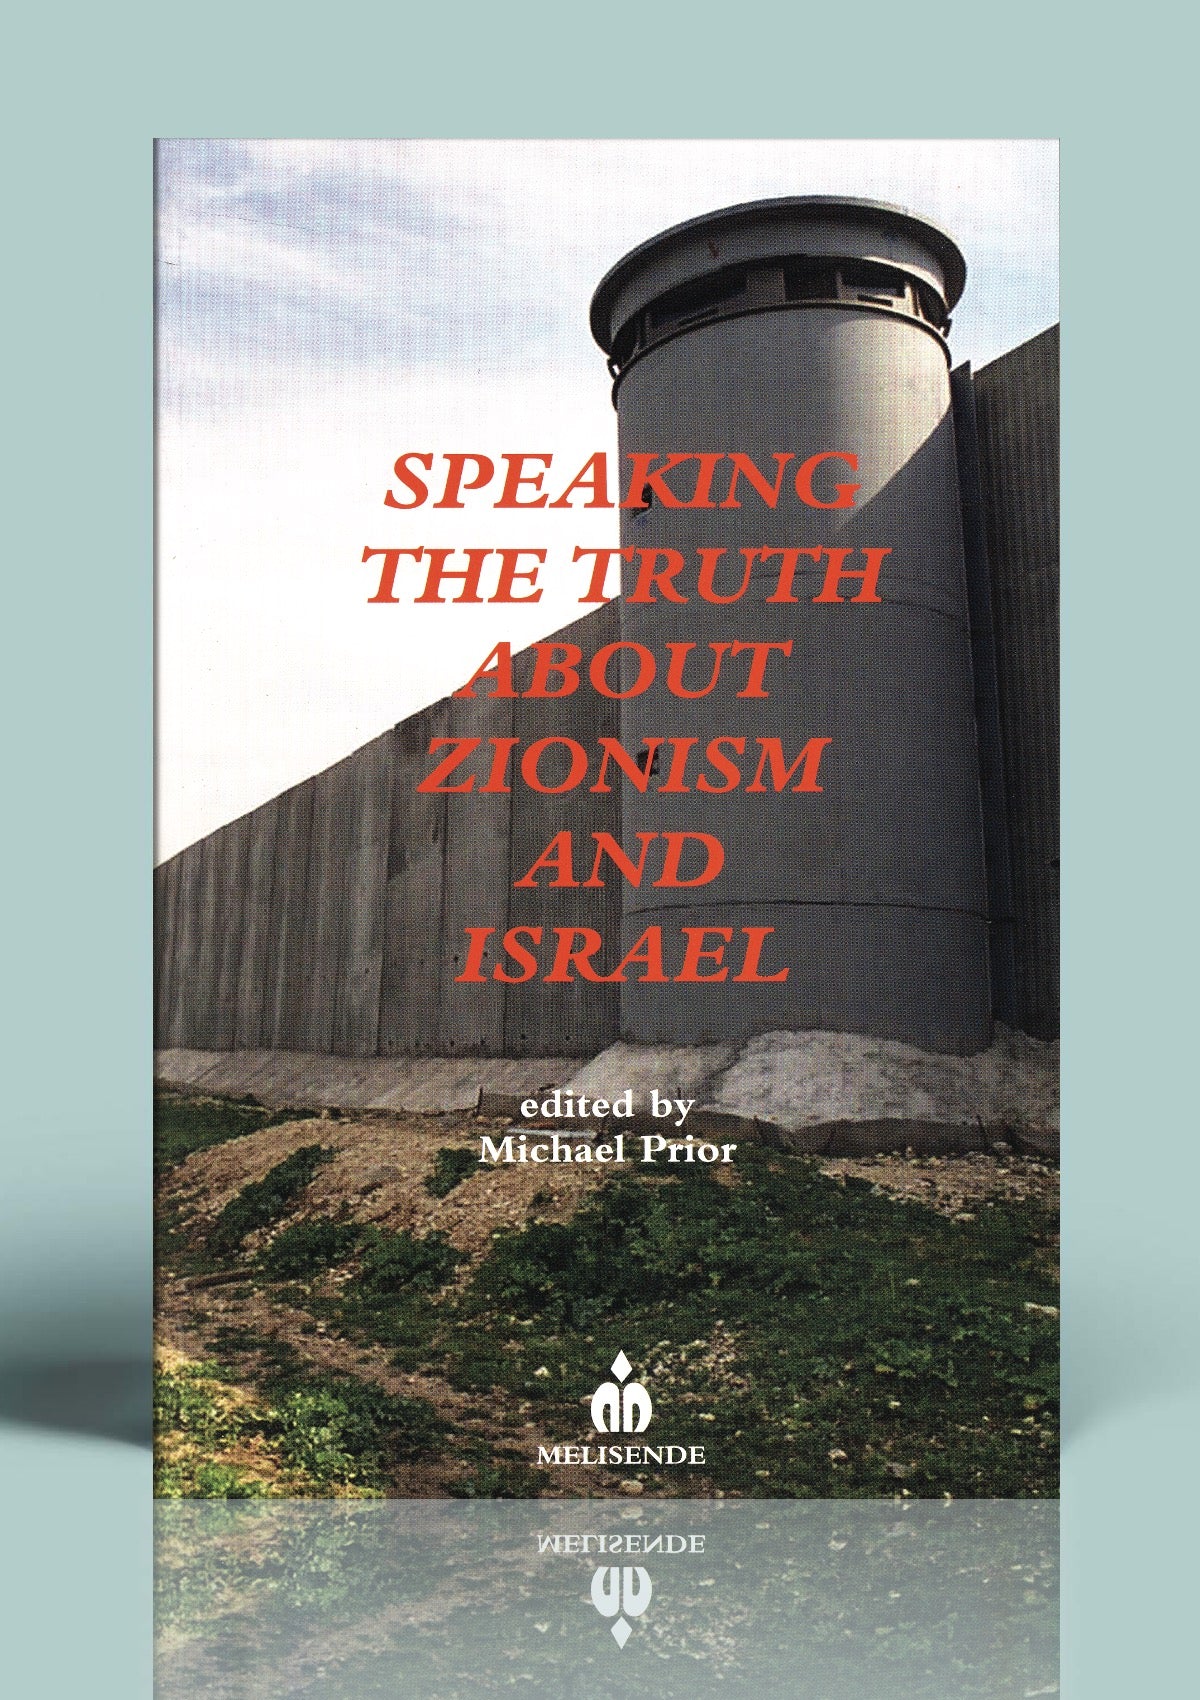 Speaking the Truth About Zionism and Israel